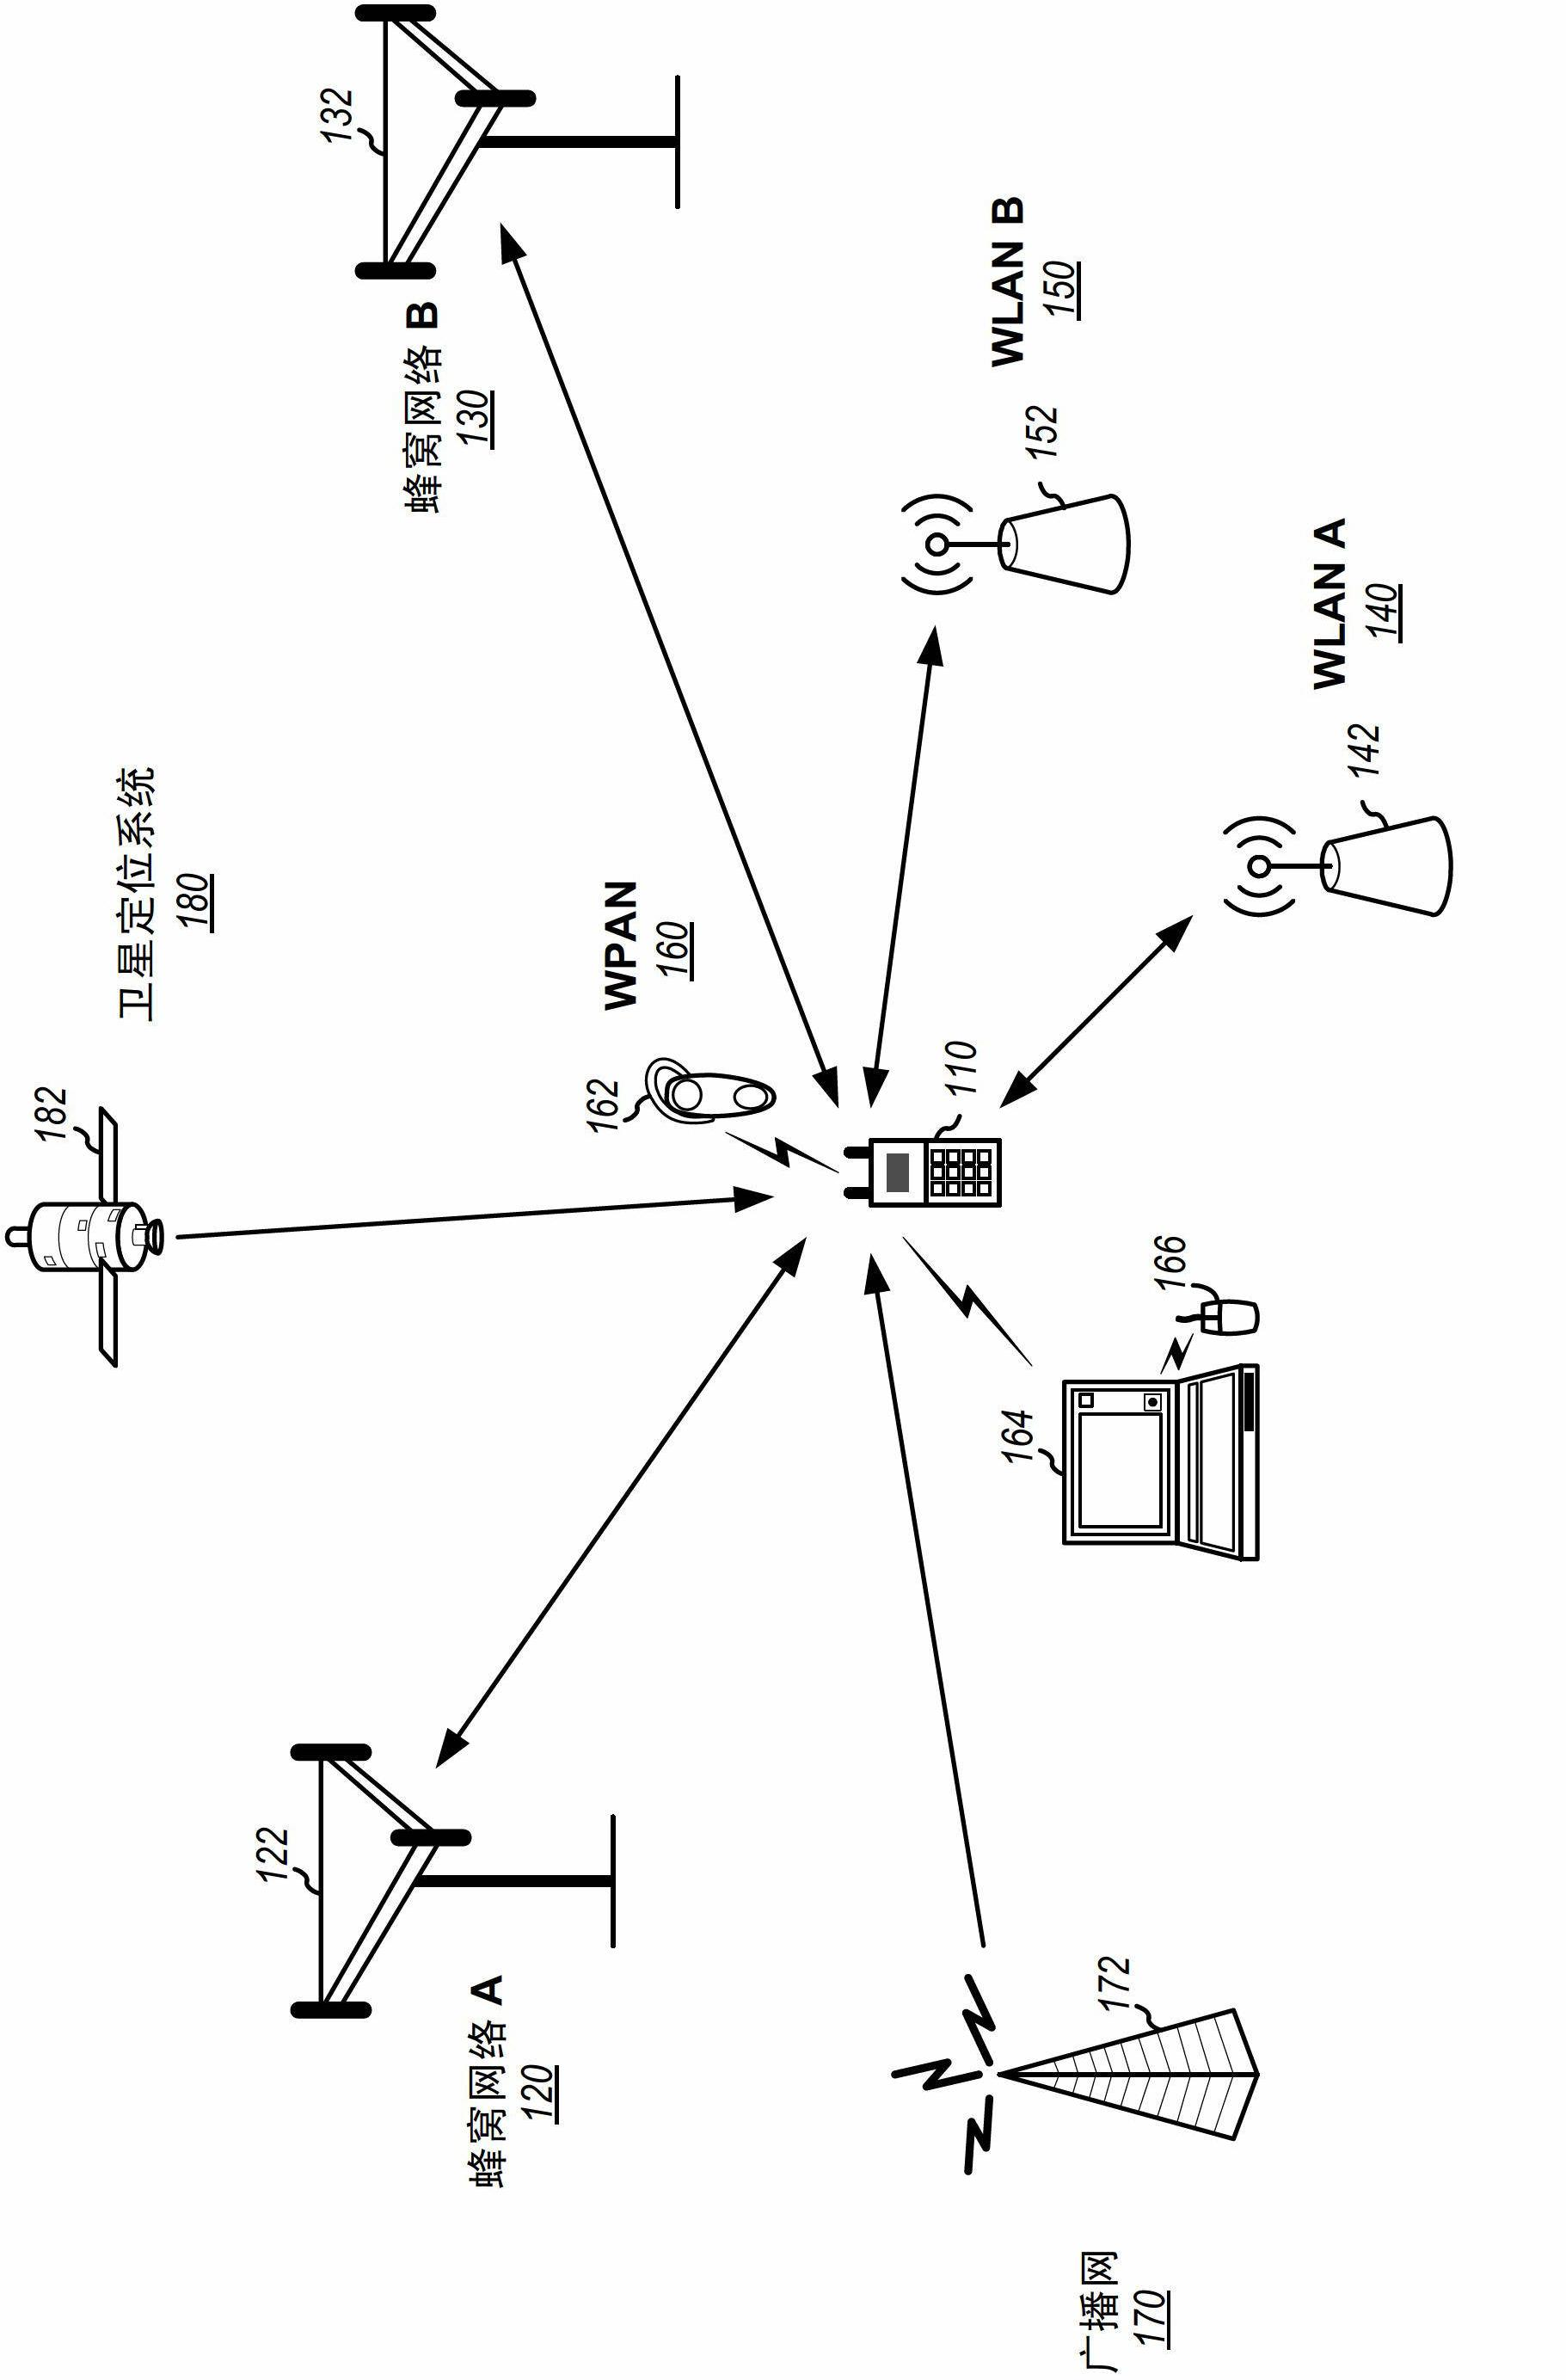 Dynamic antenna selection in a wireless device